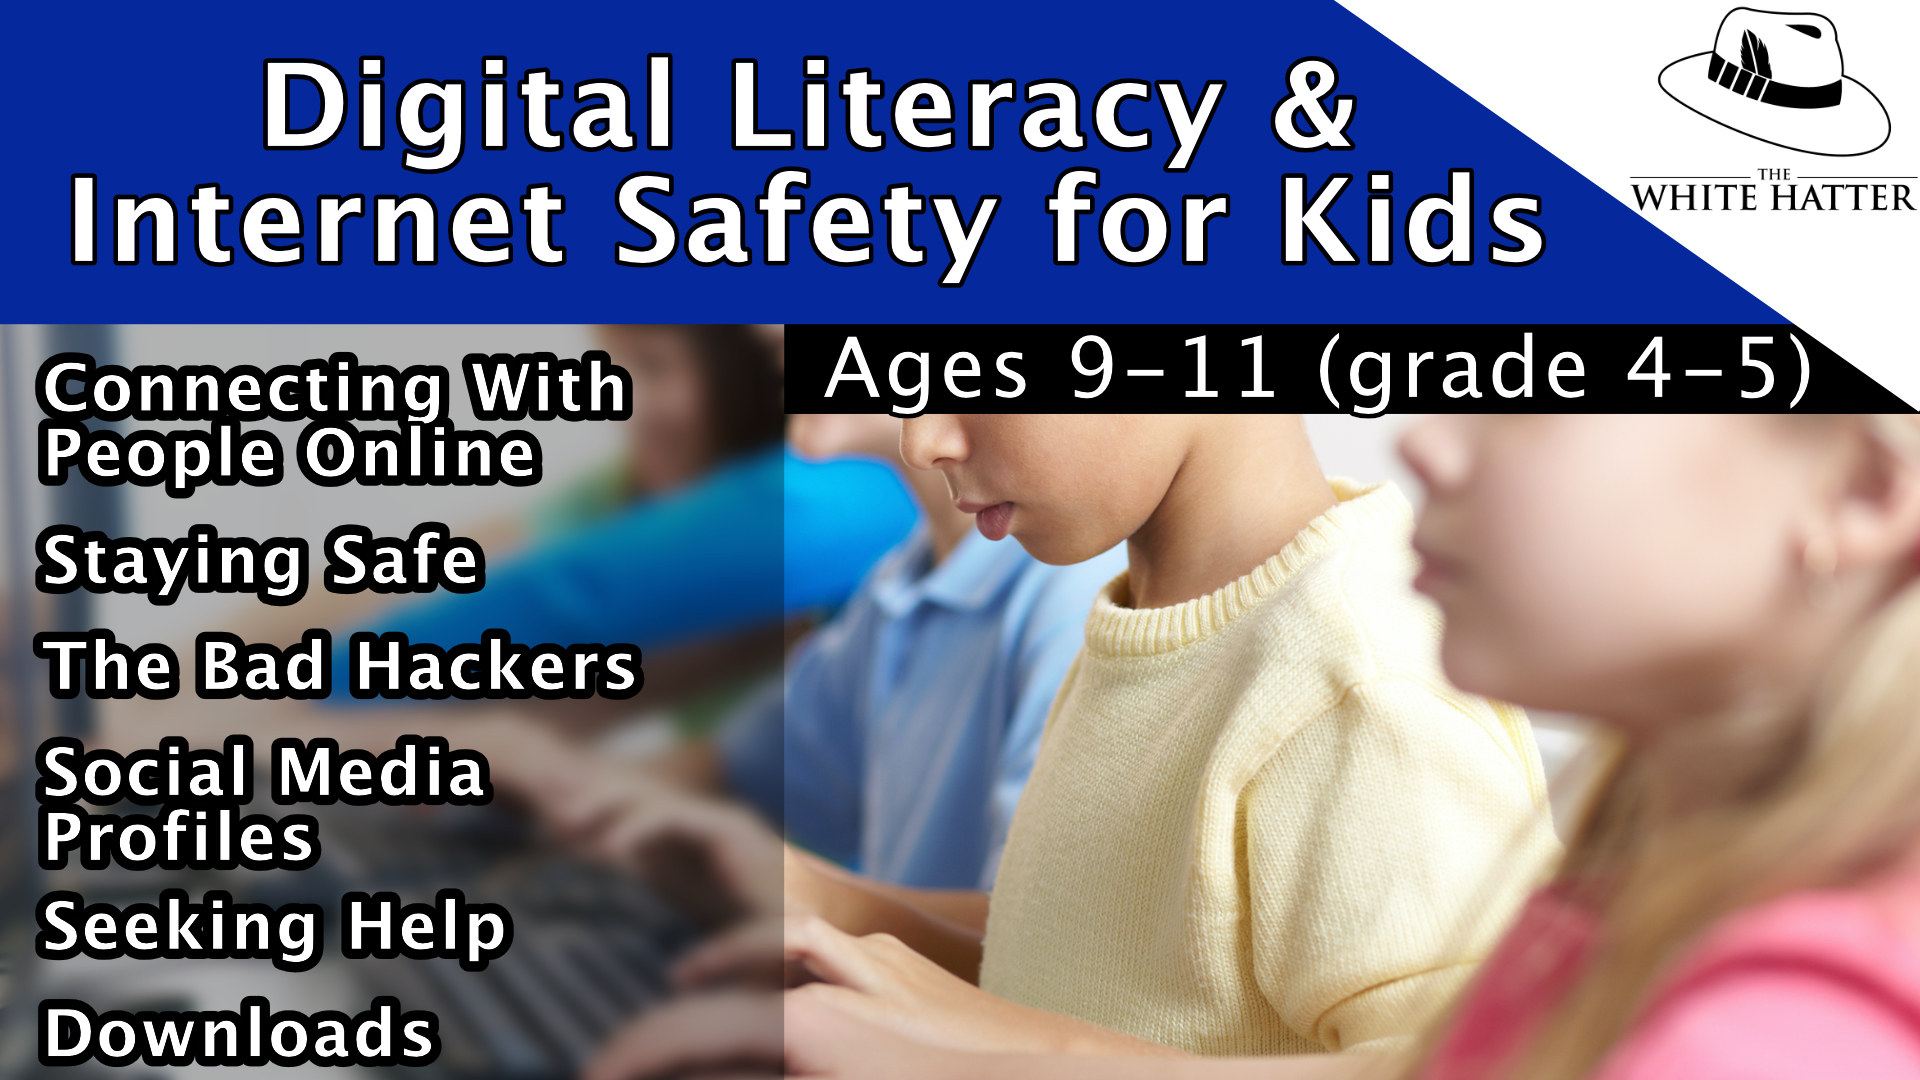 Digital Literacy and Internet Safety for Students Ages 9-11 (Grade 4-5)